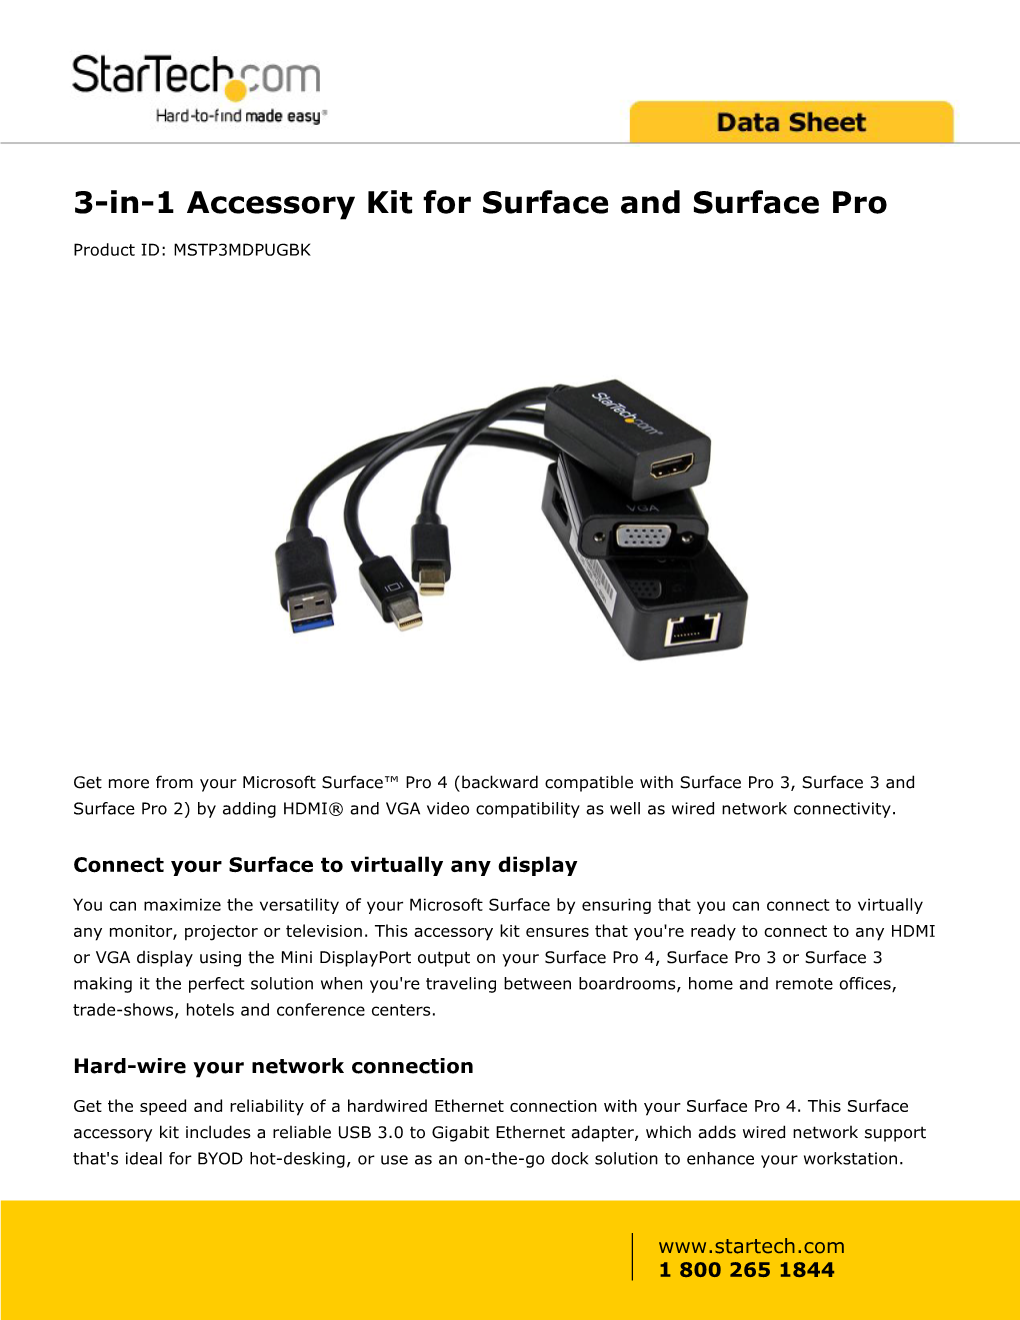 3-In-1 Accessory Kit for Surface and Surface Pro